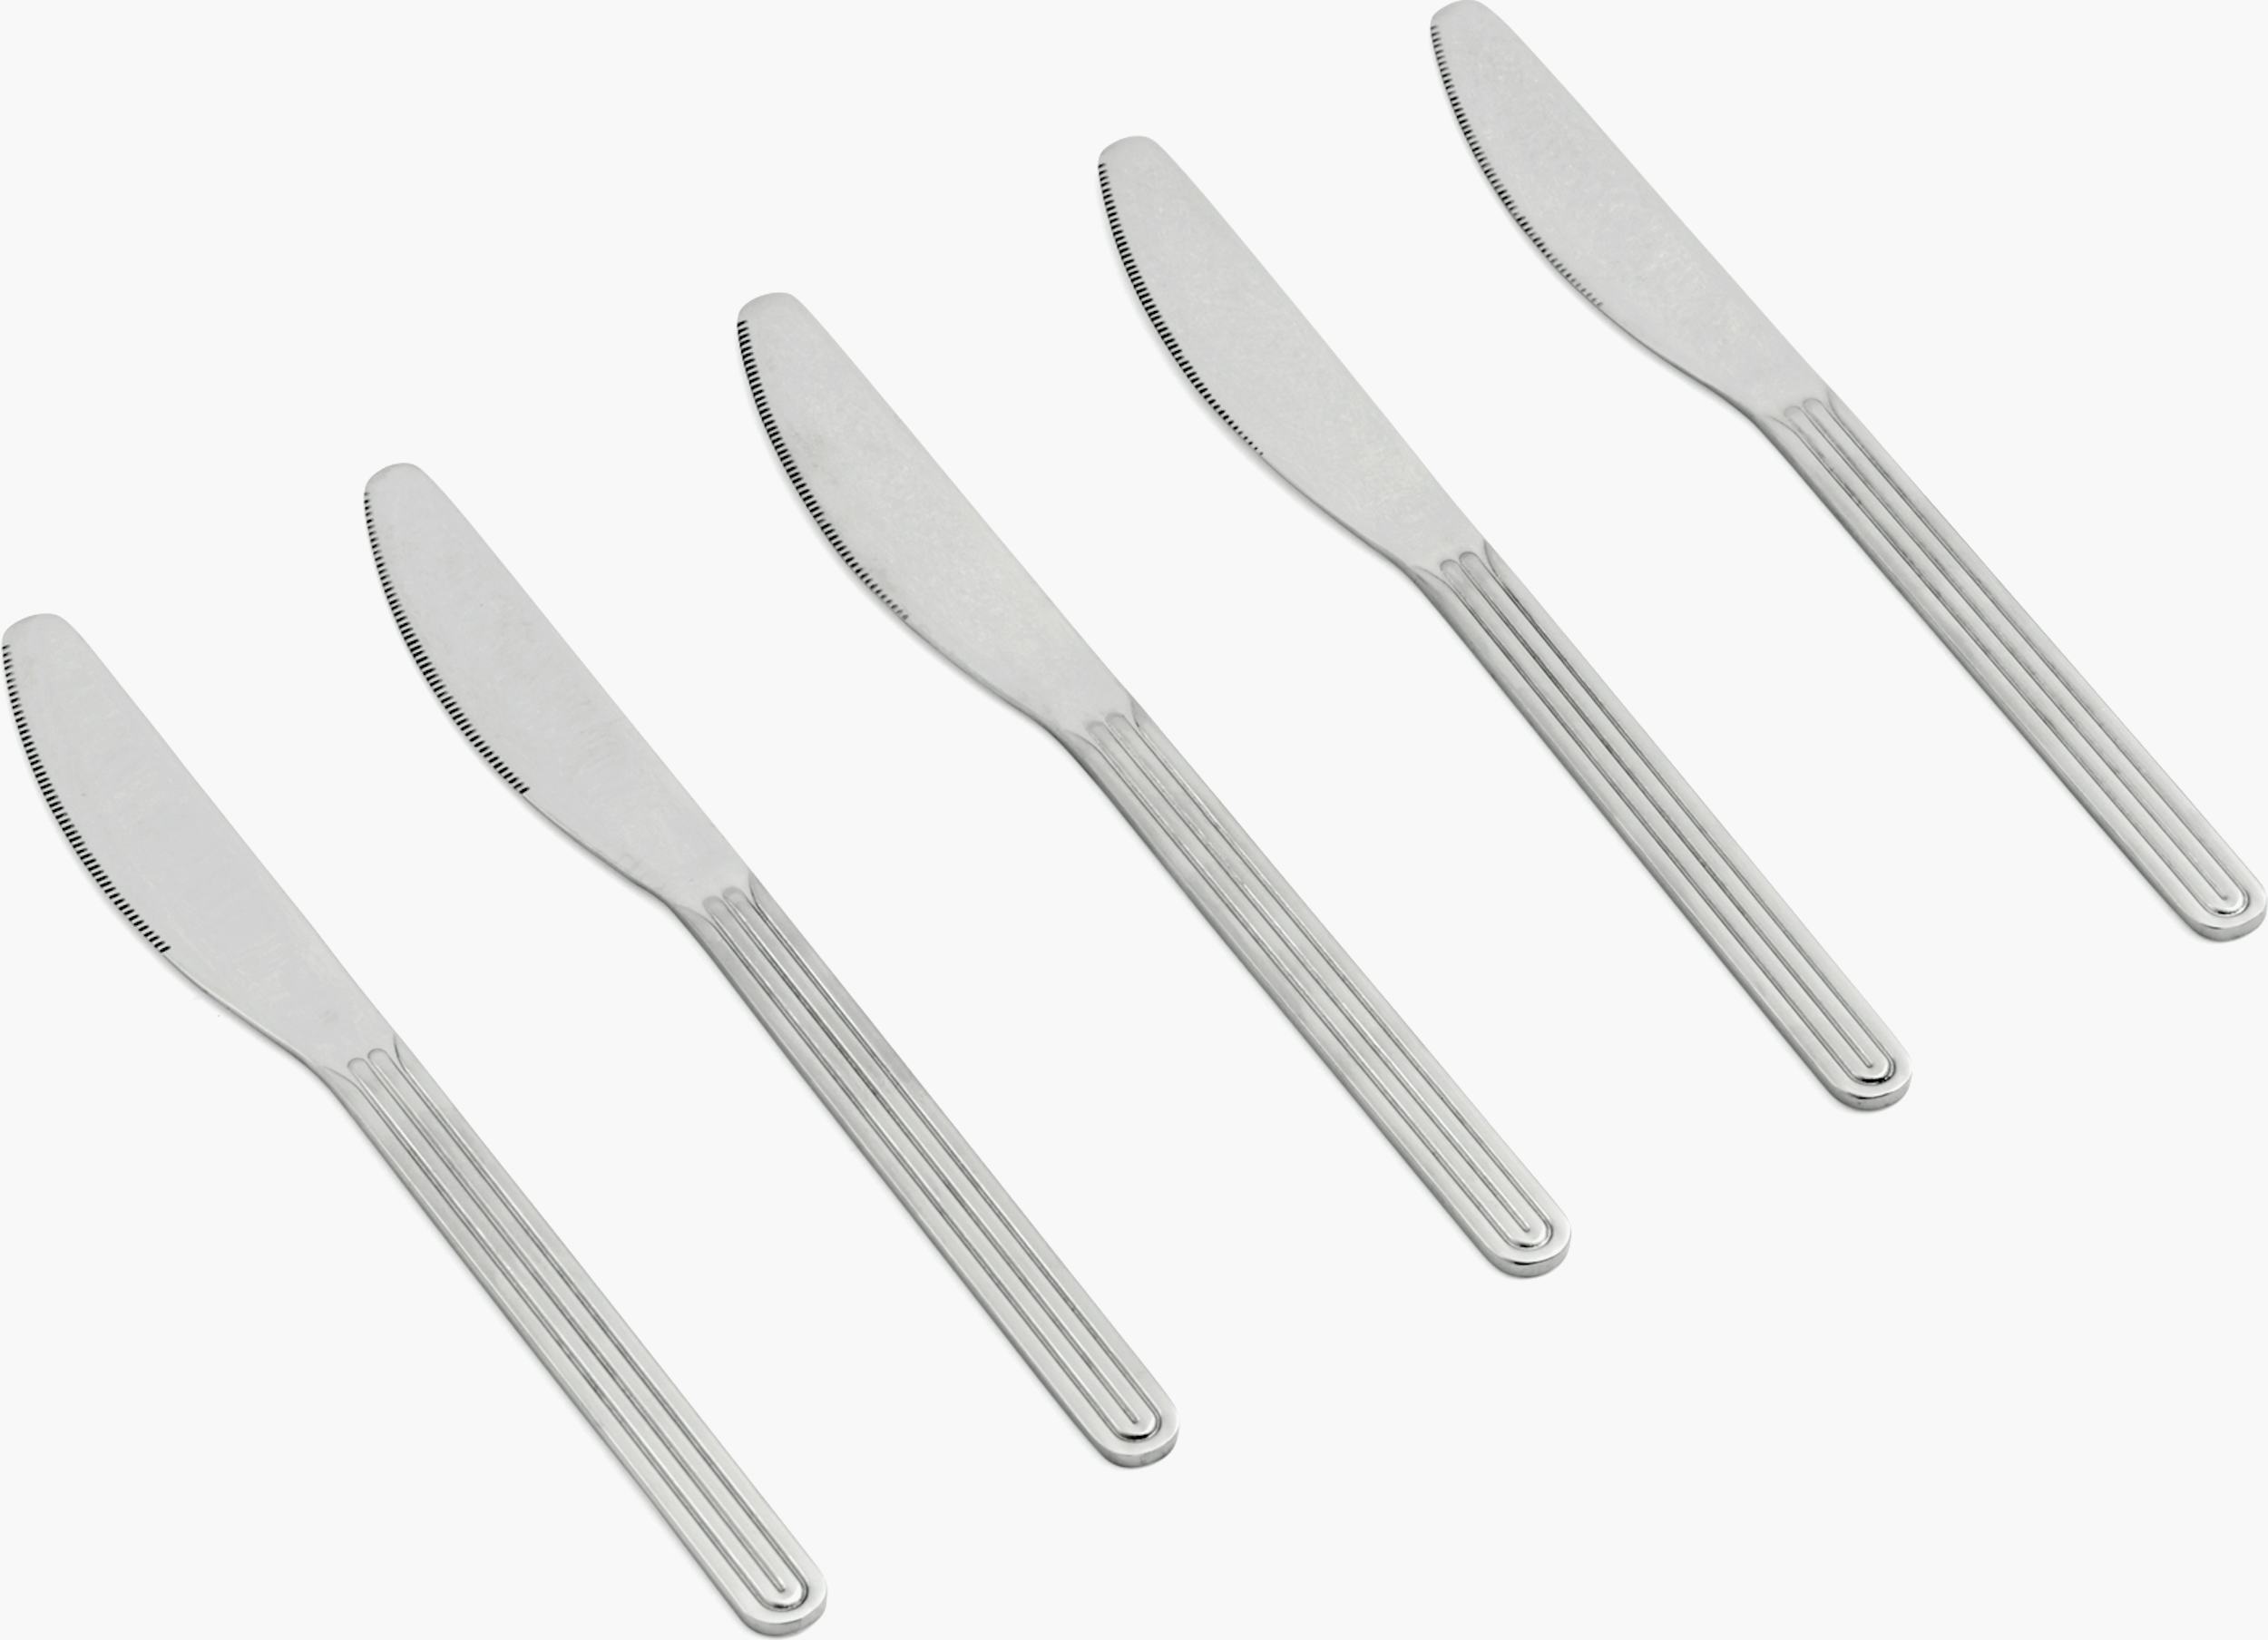 HAY Sunday Knife - Set of 5 Stainless Steel